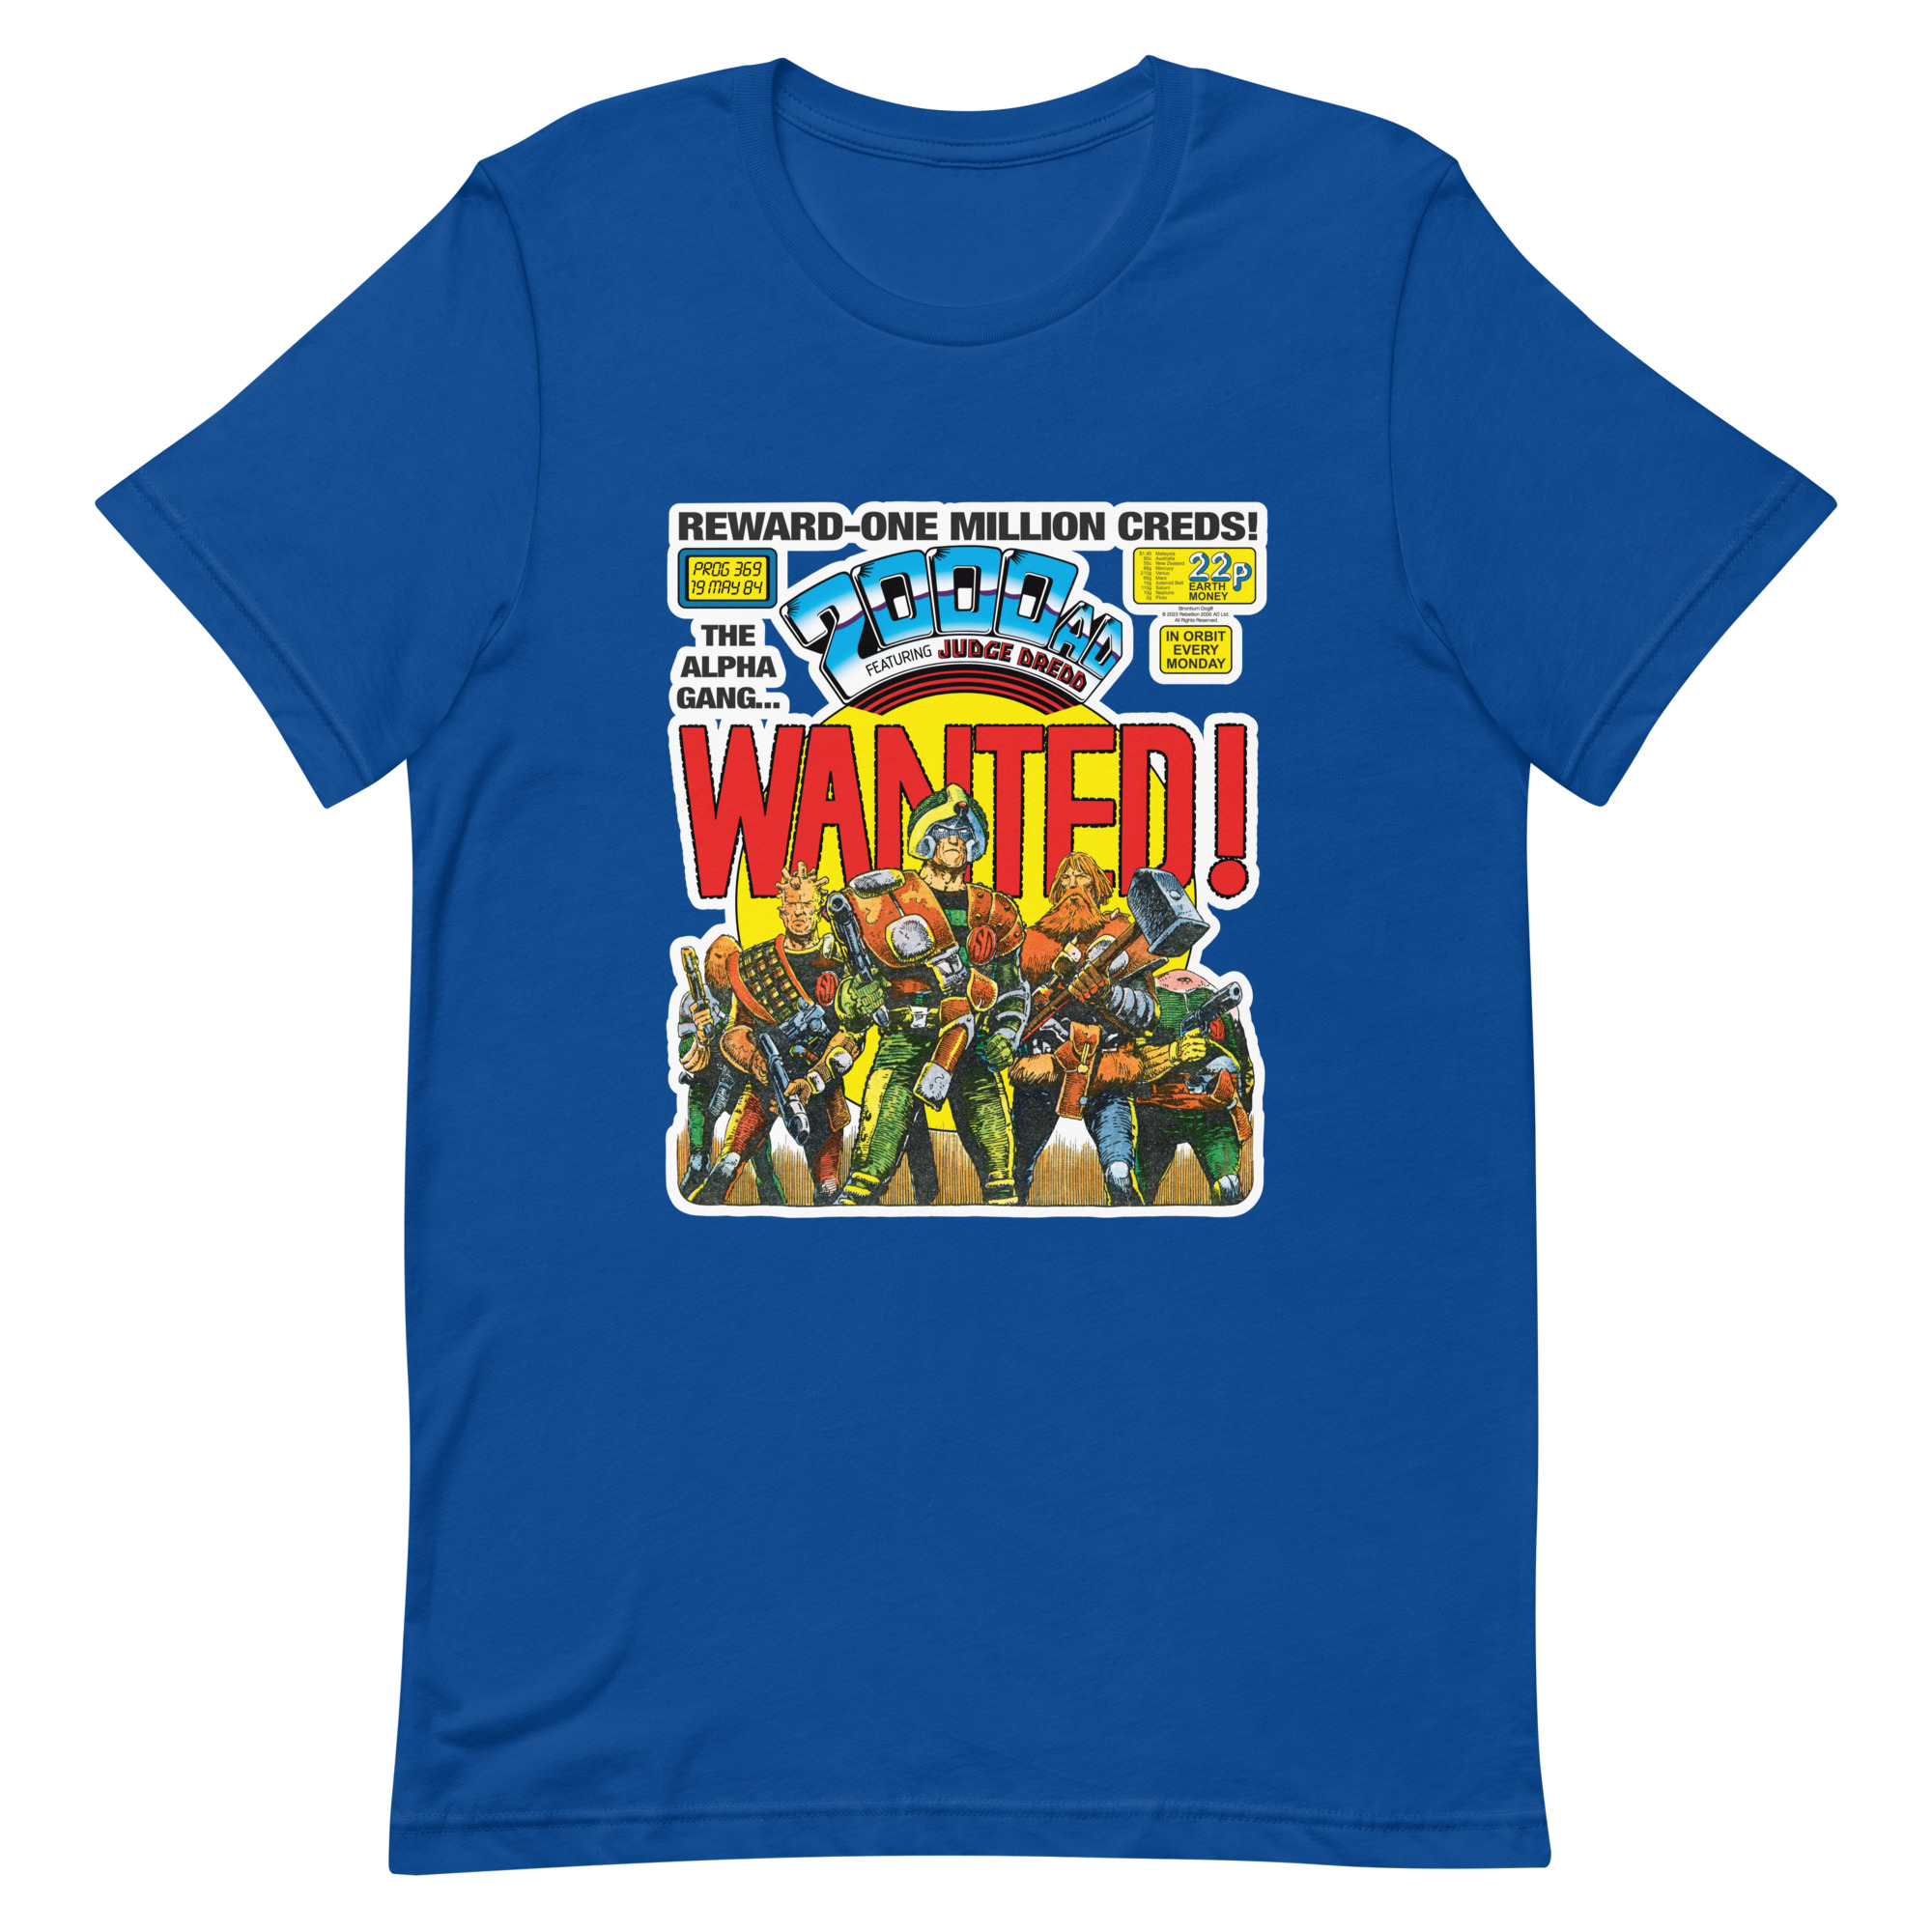 Royal Blue Tshirt with a 'Classic' 2000 AD Cover image on the chest. In the image Strontium Dog and his team, the Alpha gang, stand ready.